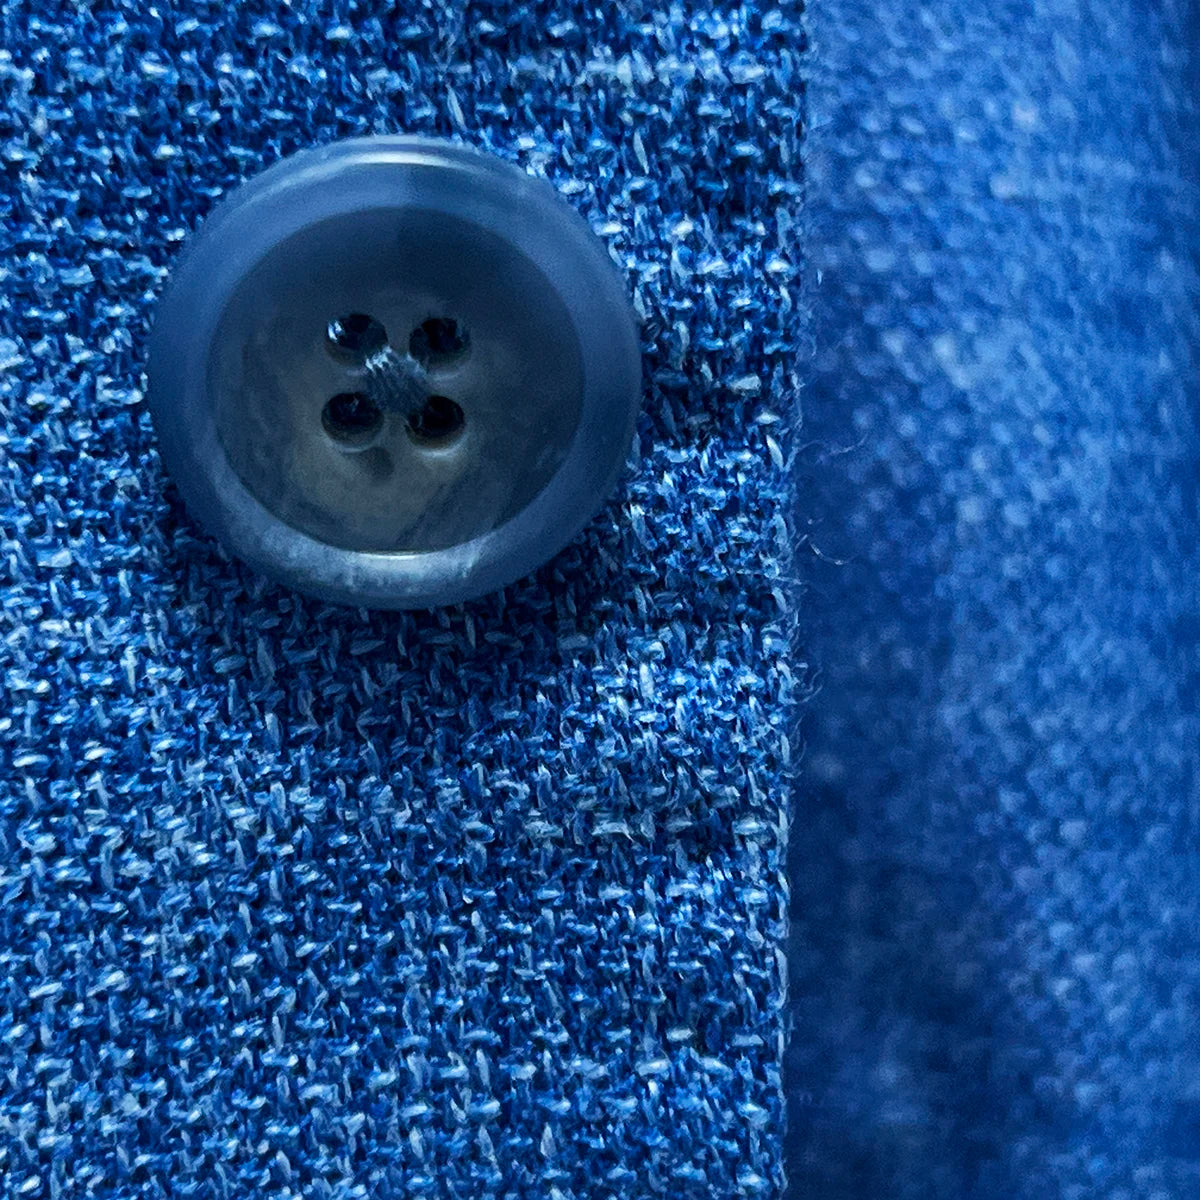 Blue horn marble buttons on the sportcoat, presenting the fine details and exquisite materials used.